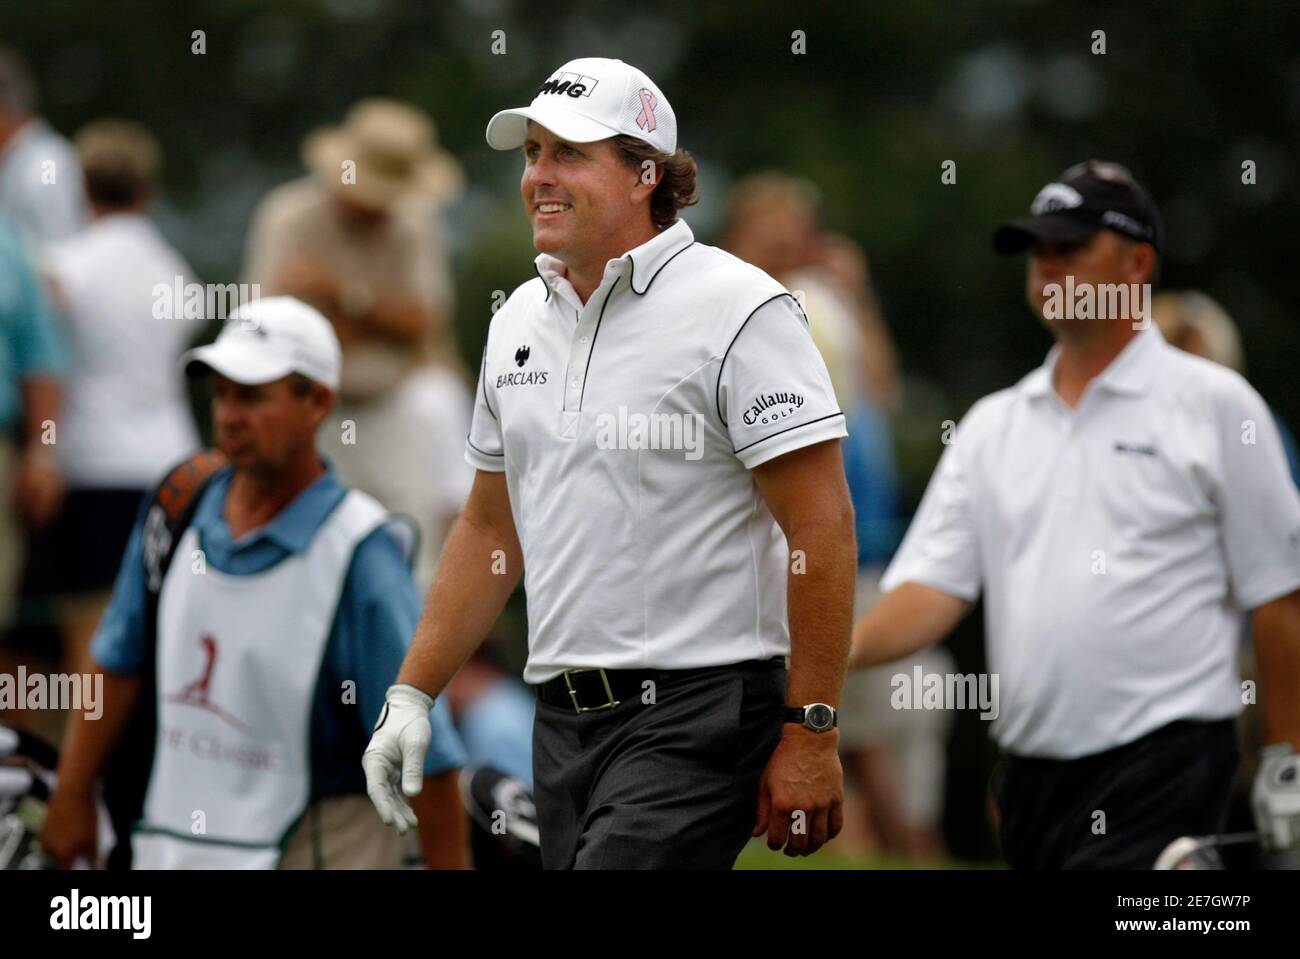 Phil Mickelson, of the U.S., walks the ninth green during the first round of the St. Jude Classic at TPC Southwind in Memphis, Tennessee June 11, 2009.   REUTERS/Nikki Boertman    (UNITED STATES SPORT GOLF) Stock Photo